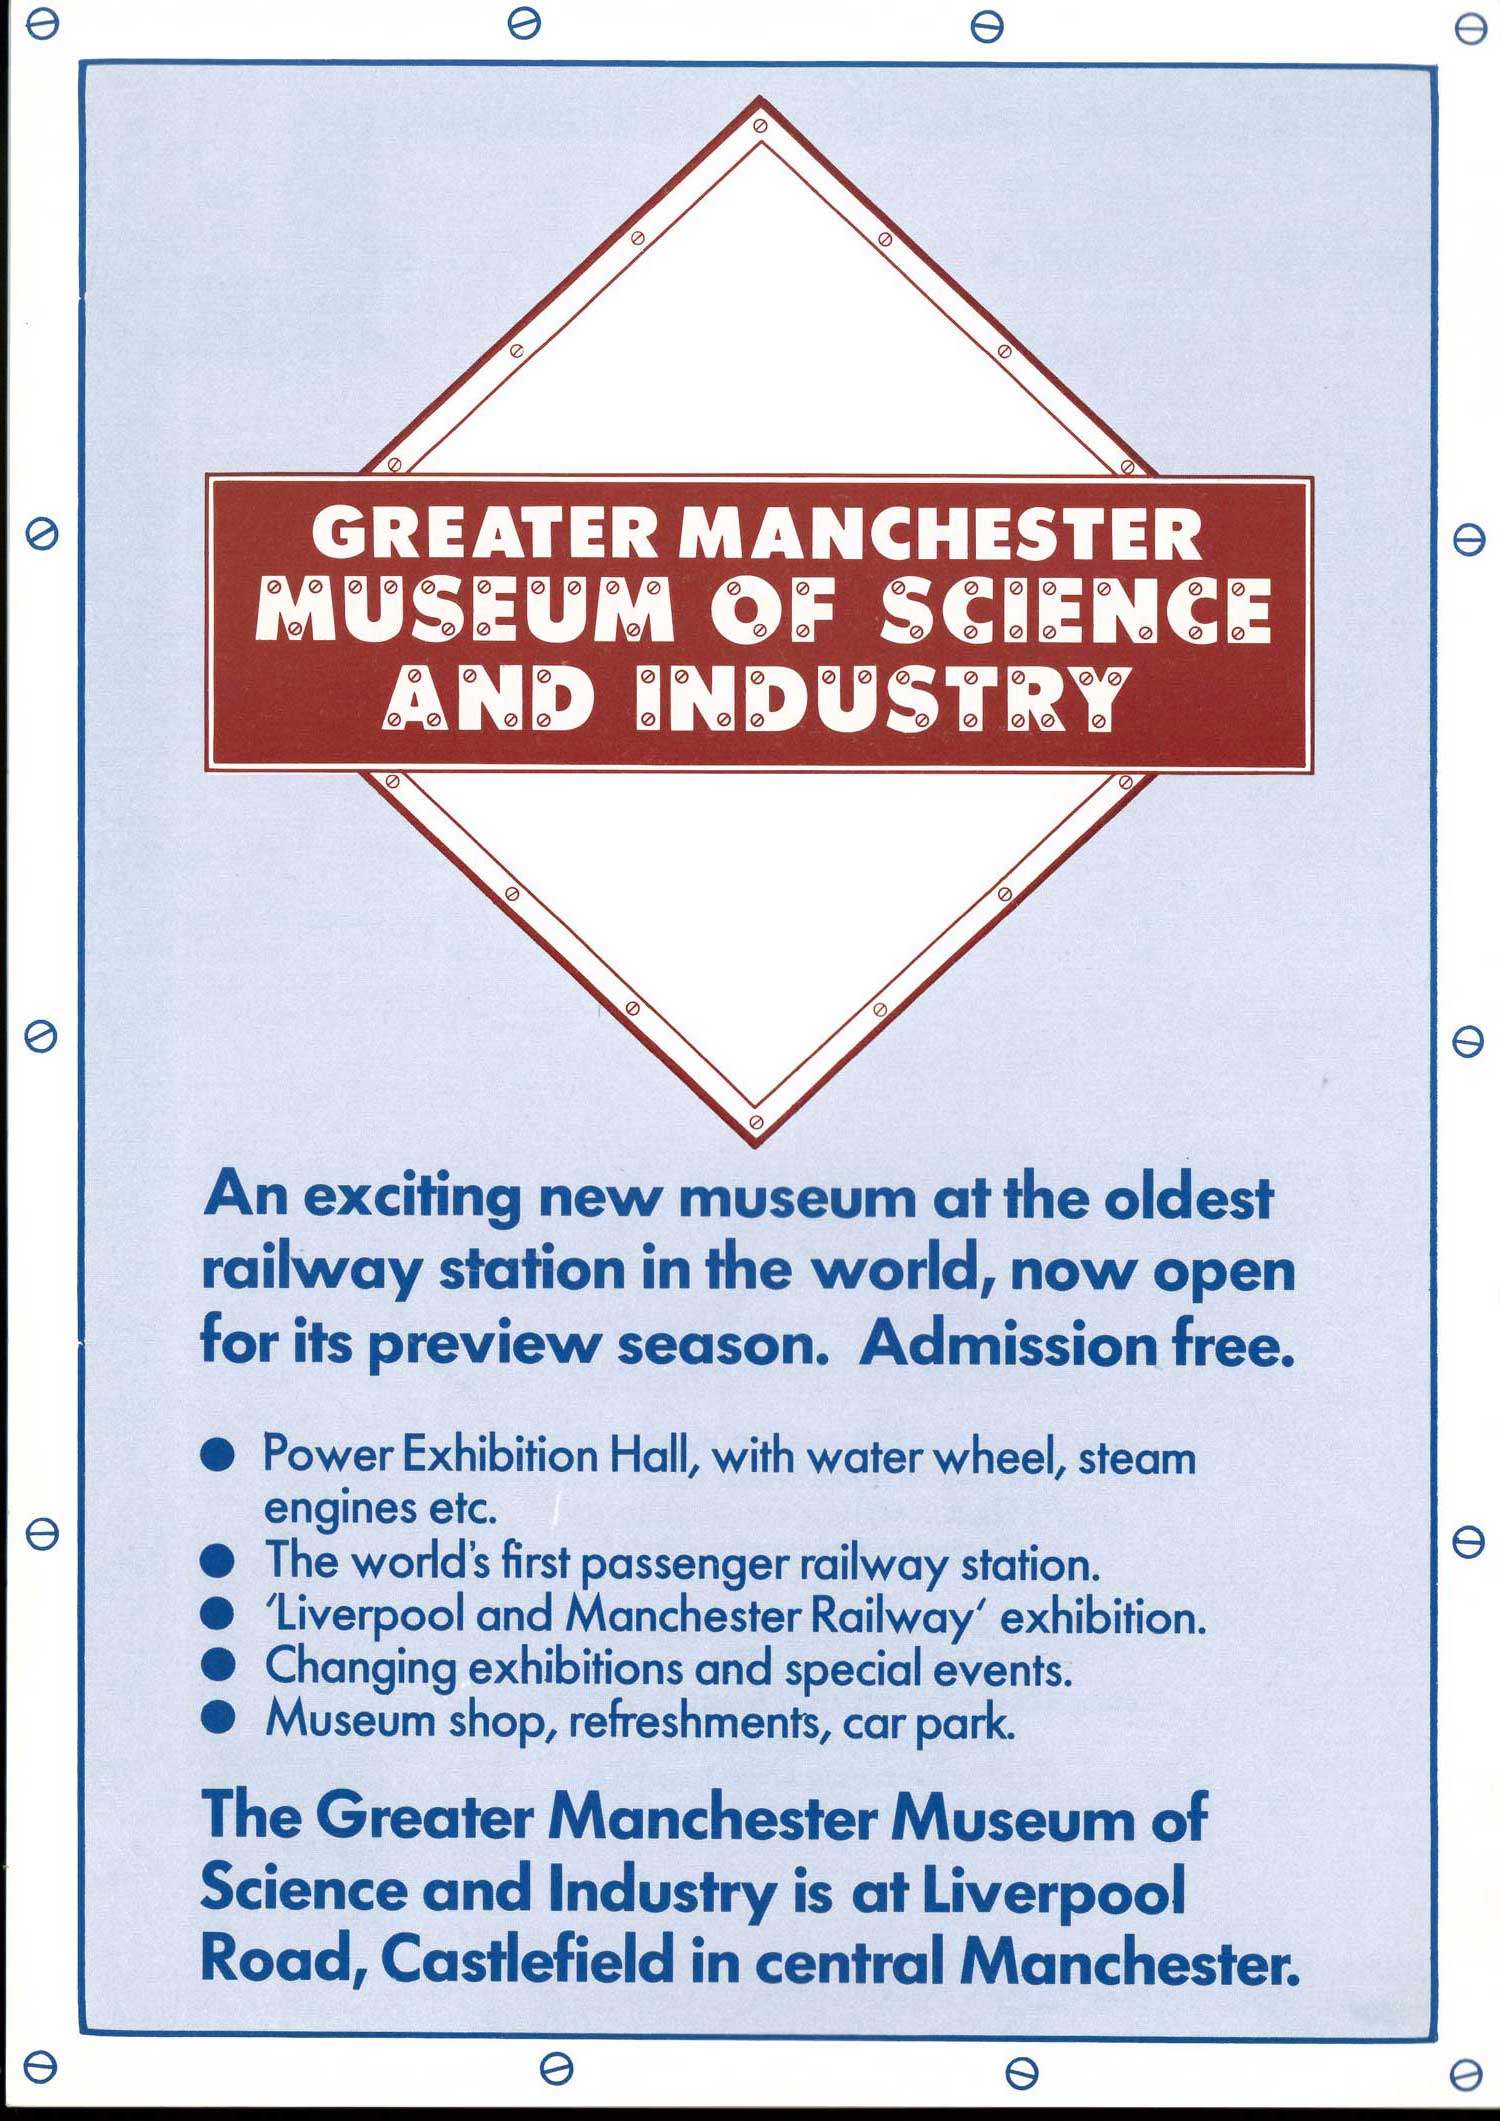 A leaflet from 1983 for the Greater Manchester Museum of Science and Industry